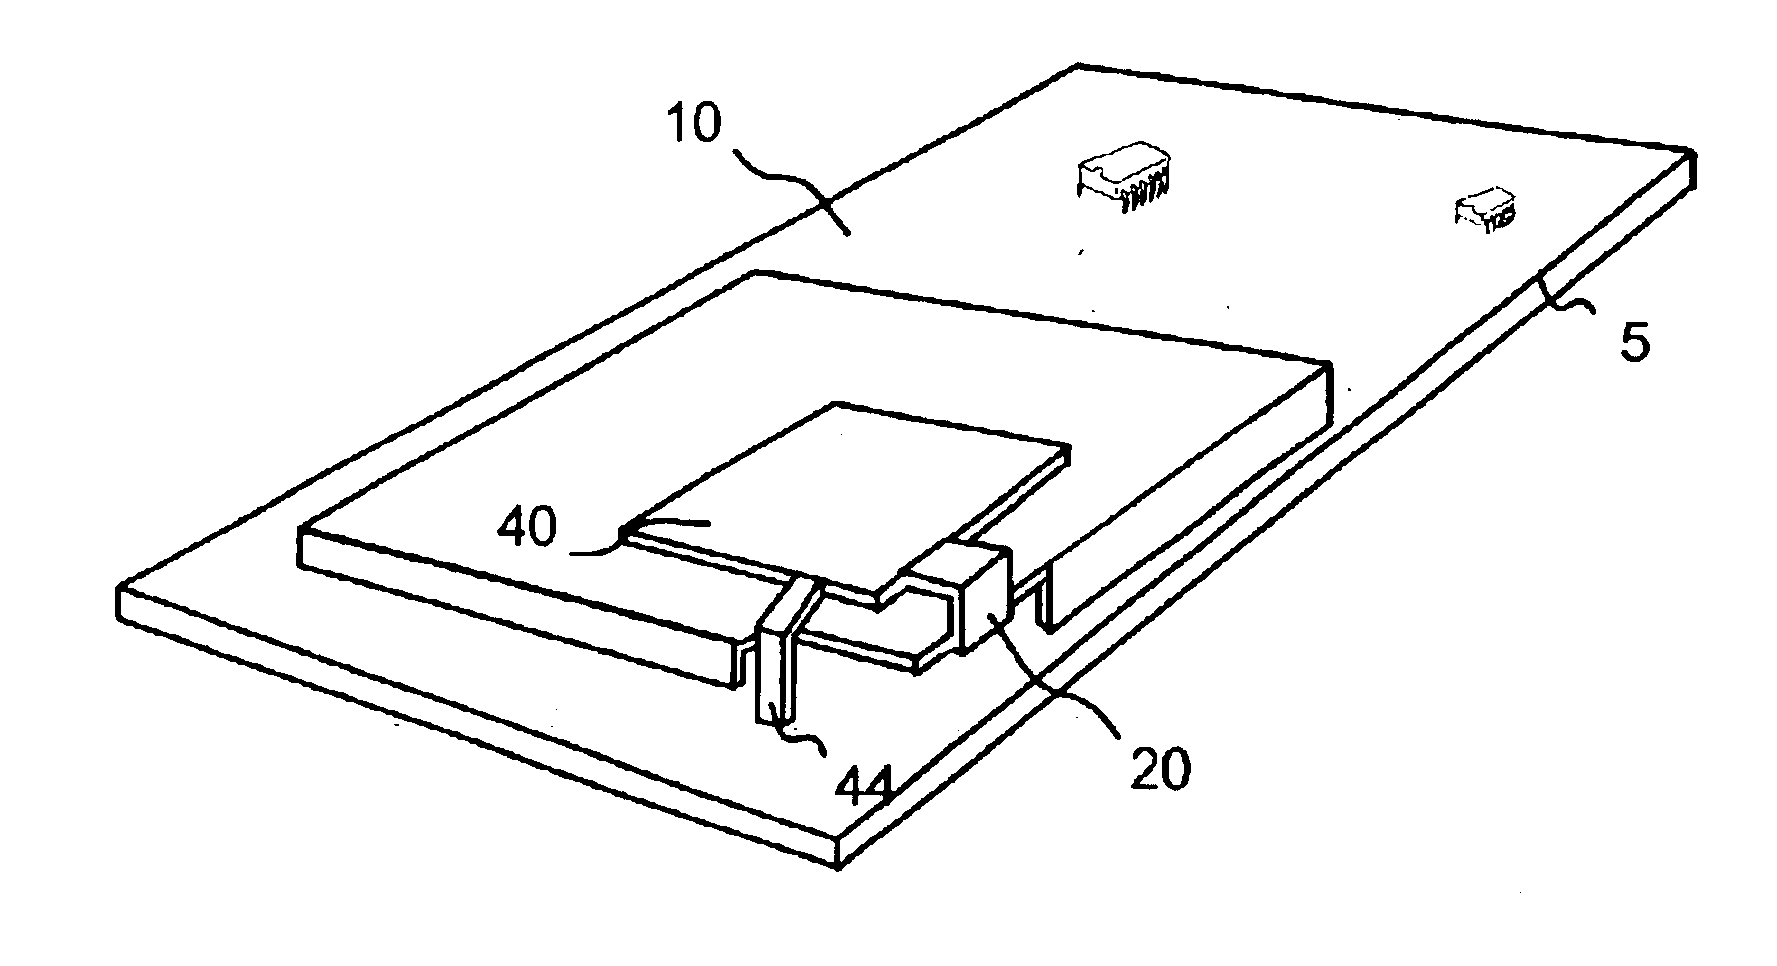 Integrated inverted F antenna and shield can